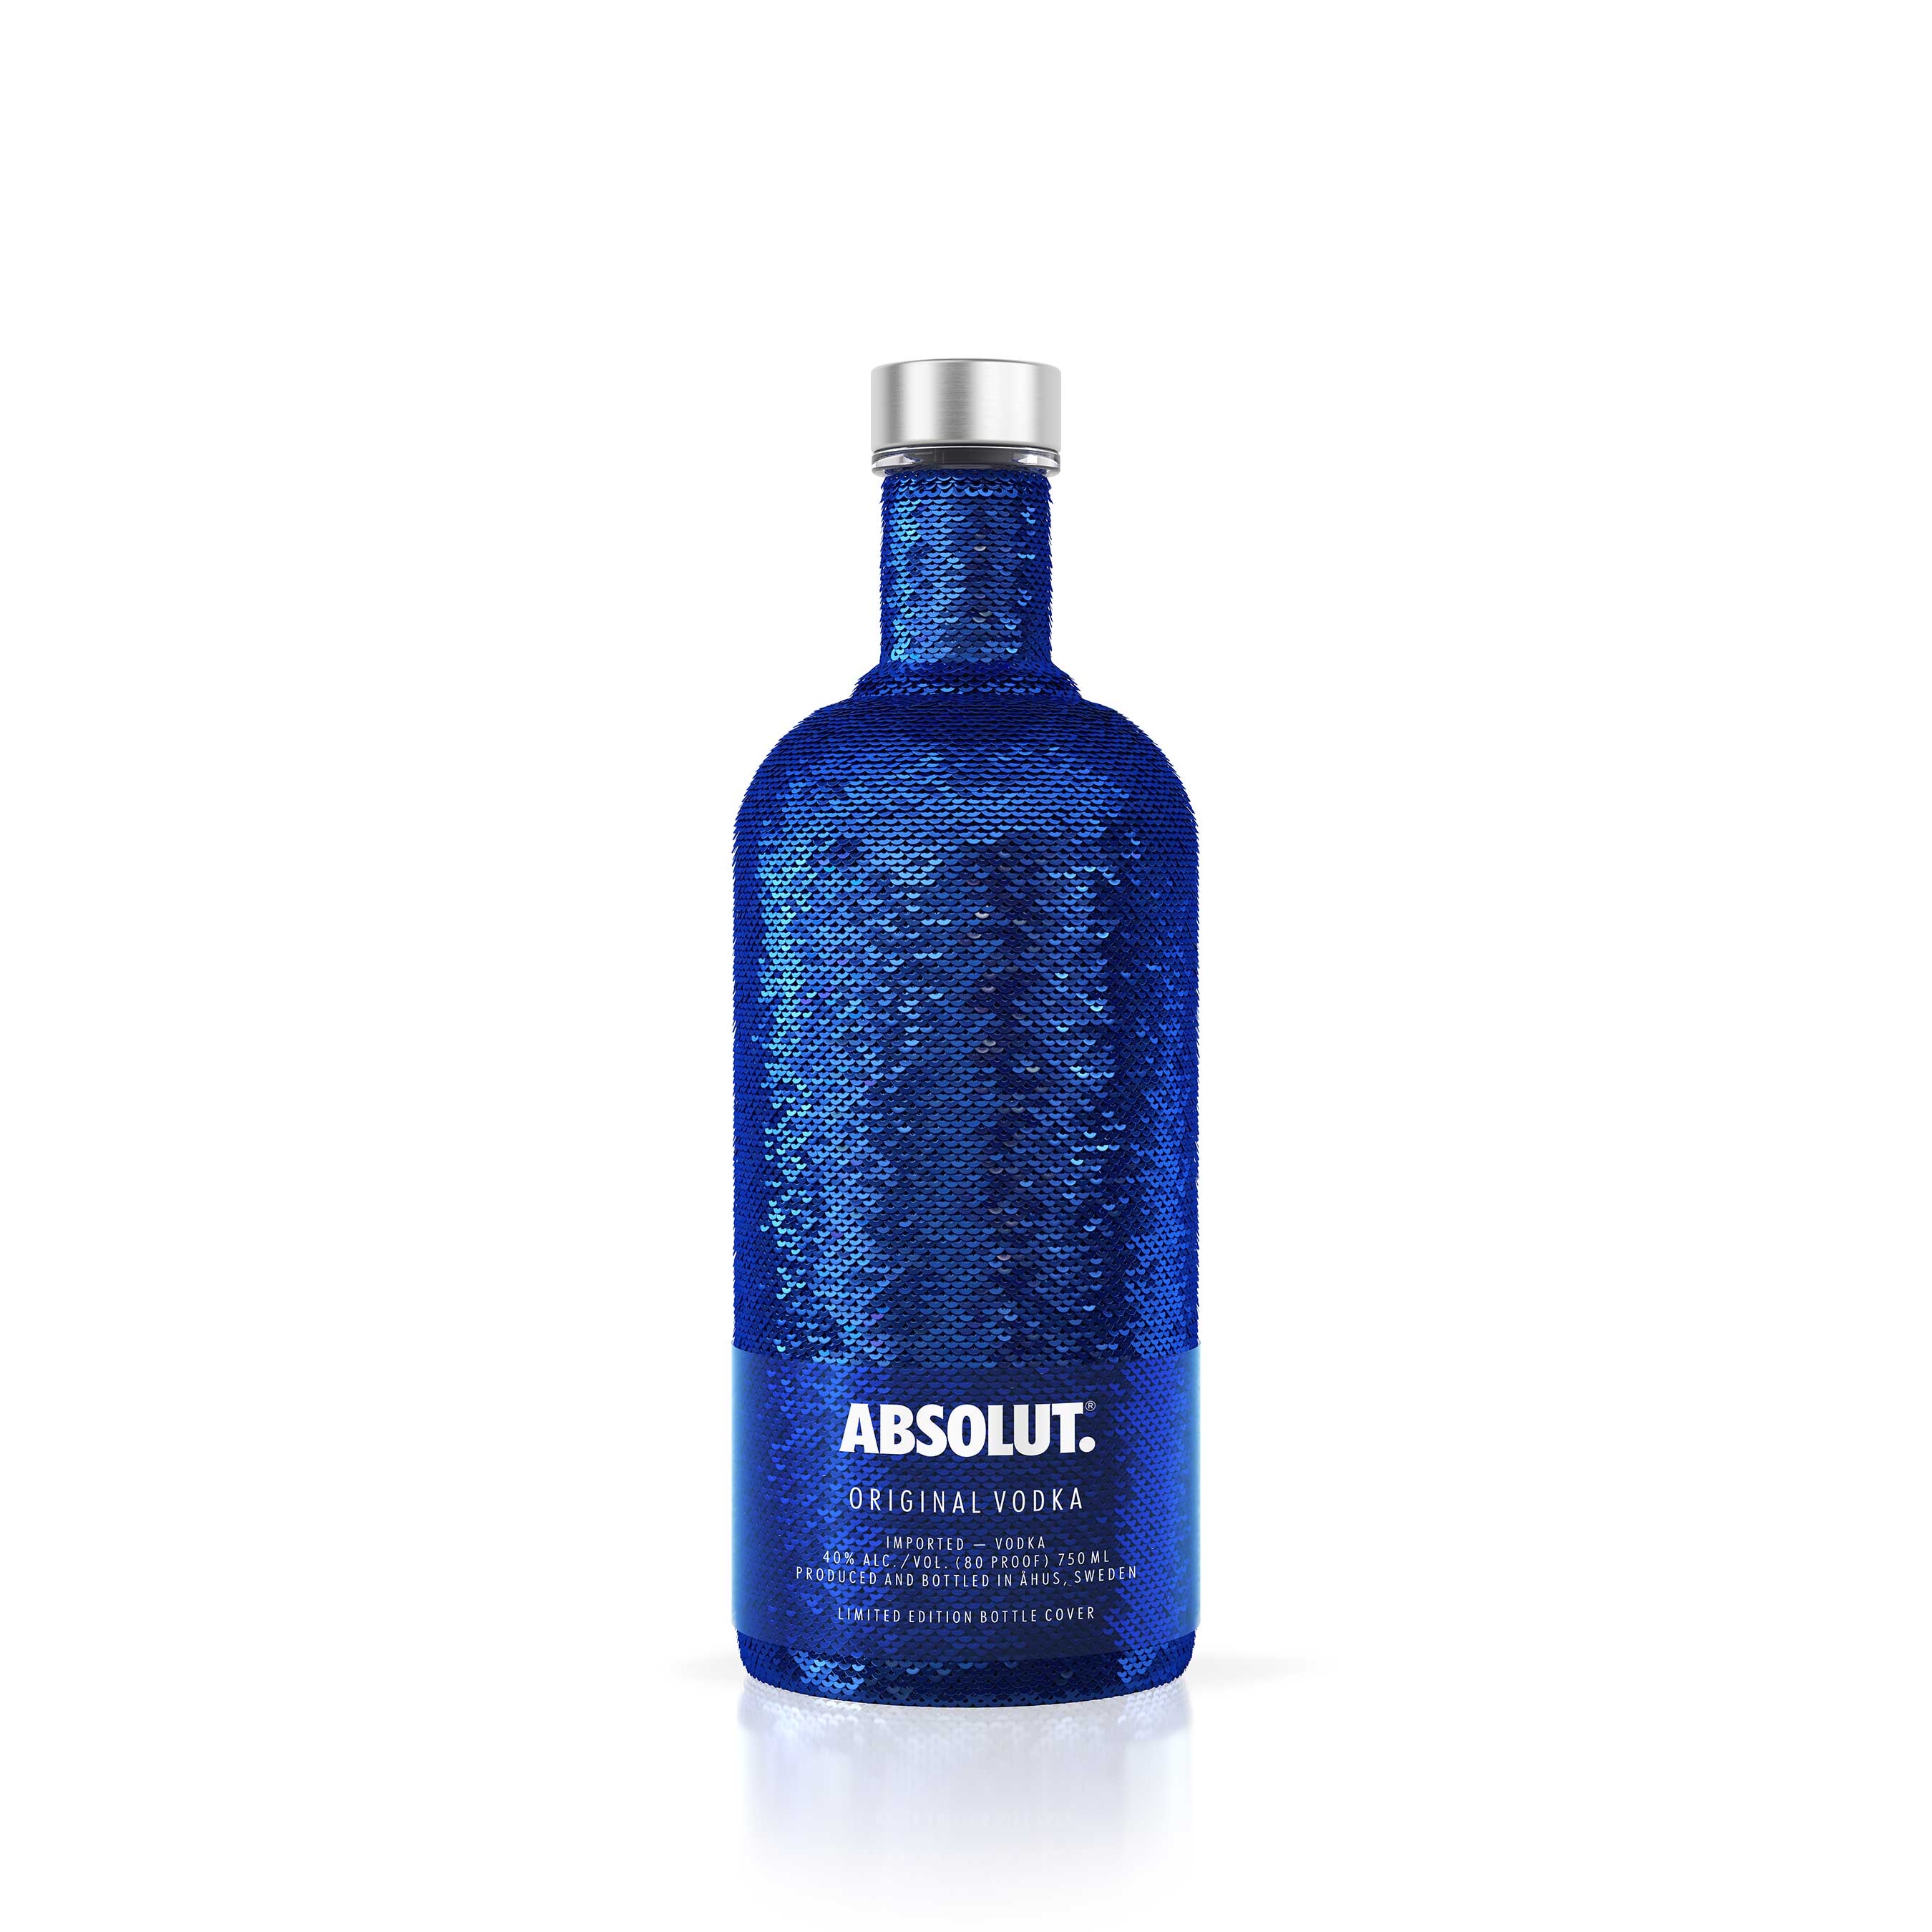 Absolut’s limited edition sequin bottle cover changes color from sapphire to silver with a simple swipe.